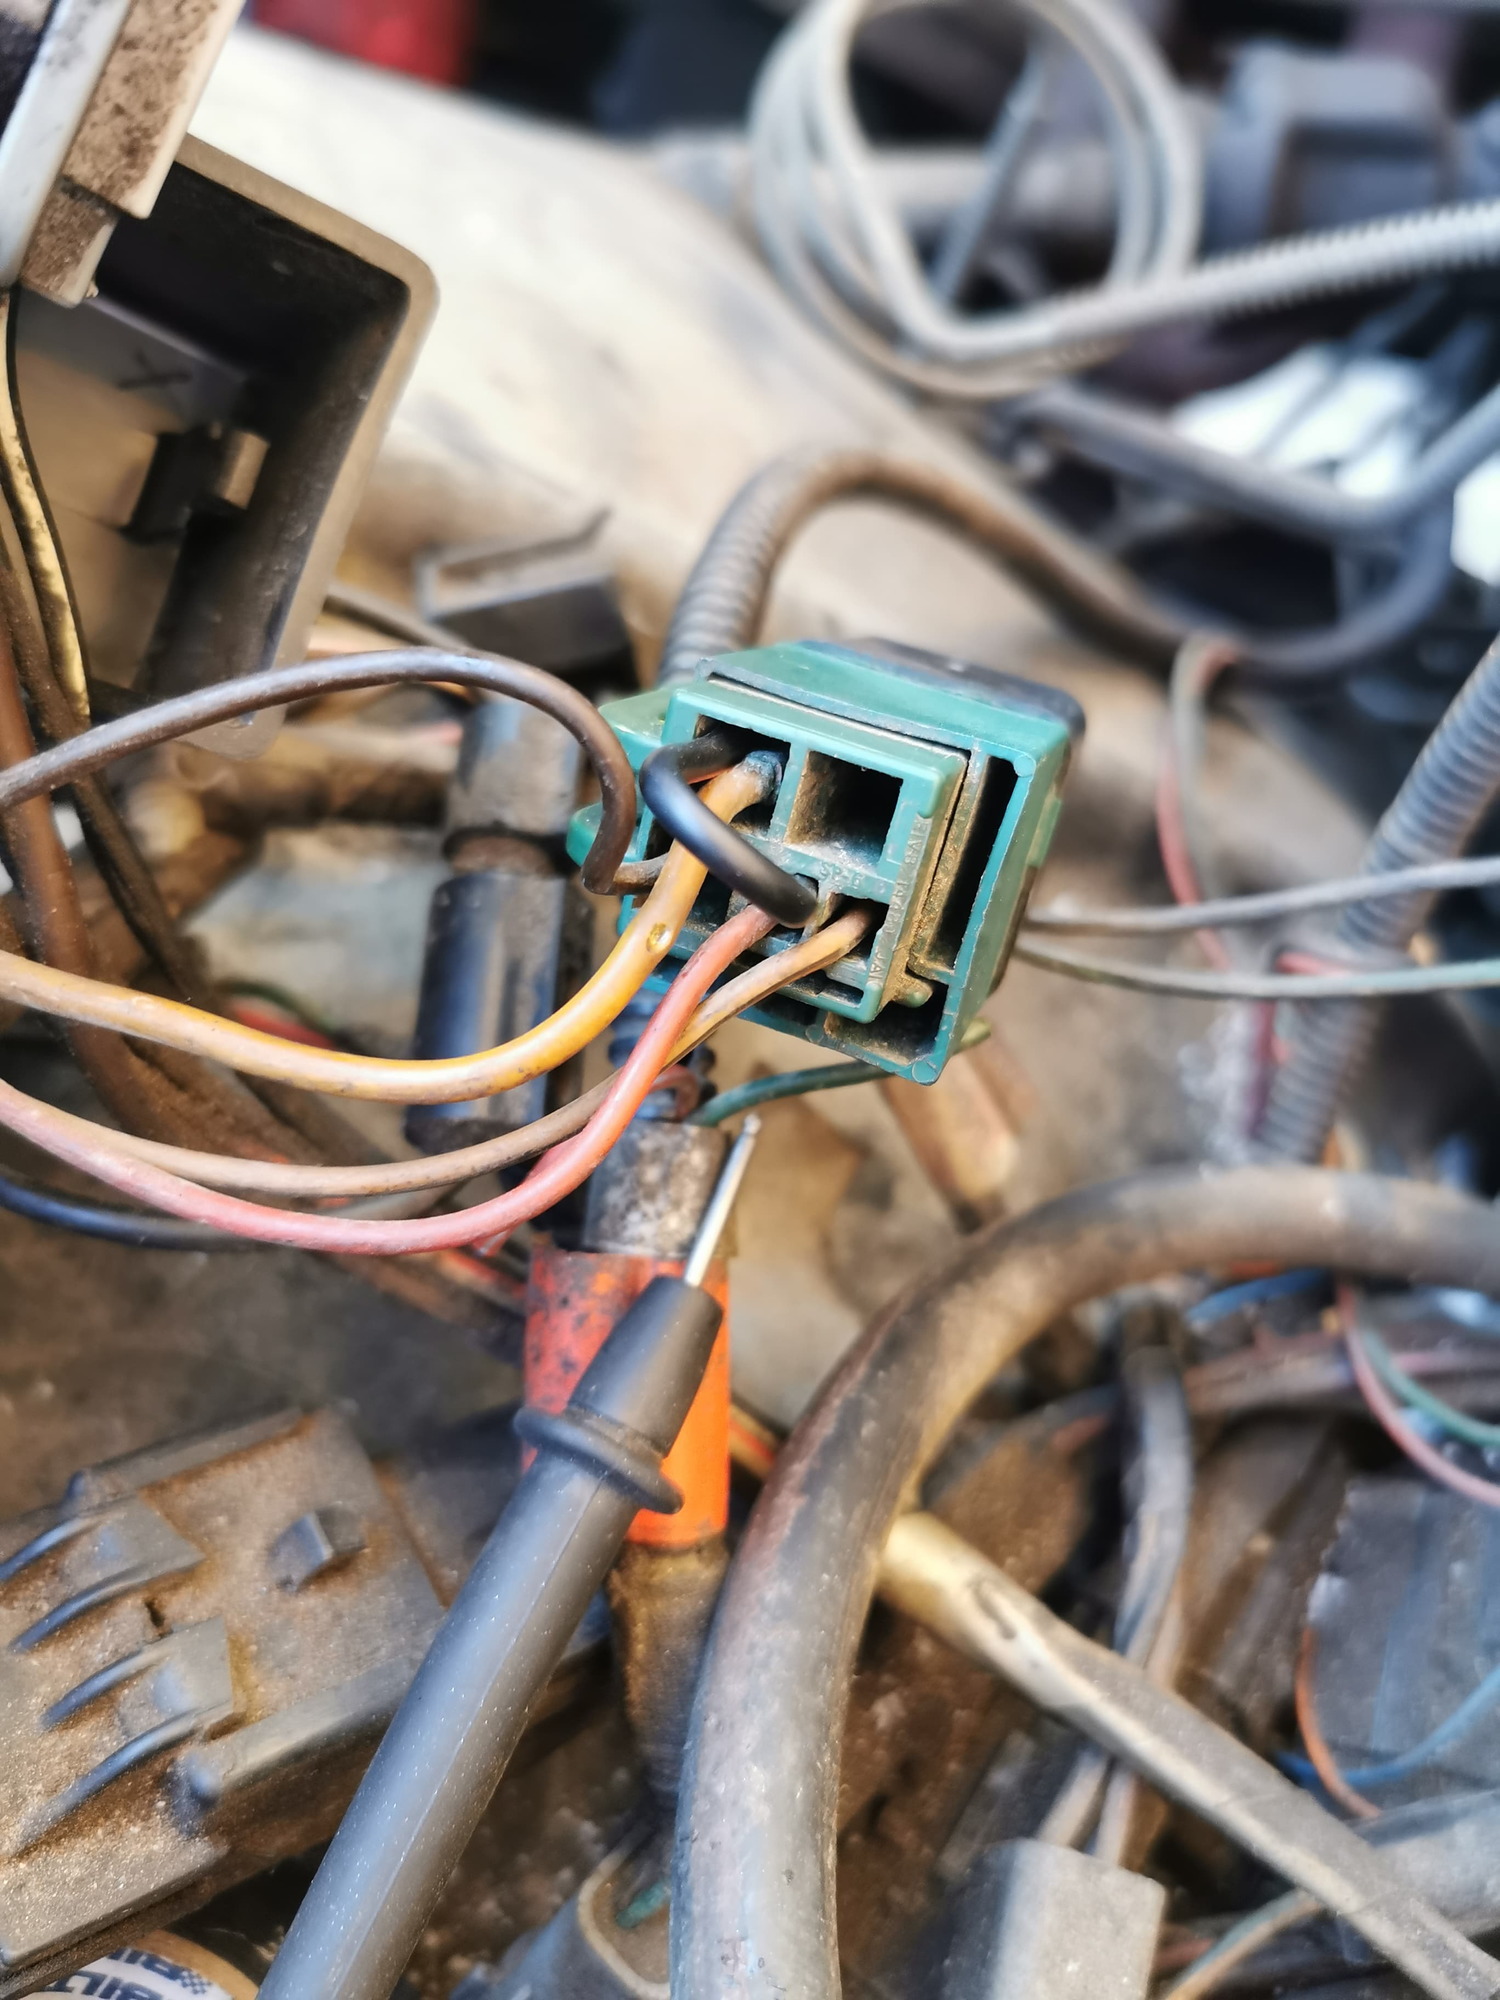 1987 bronco power to fuel pump issue - Ford Truck Enthusiasts Forums